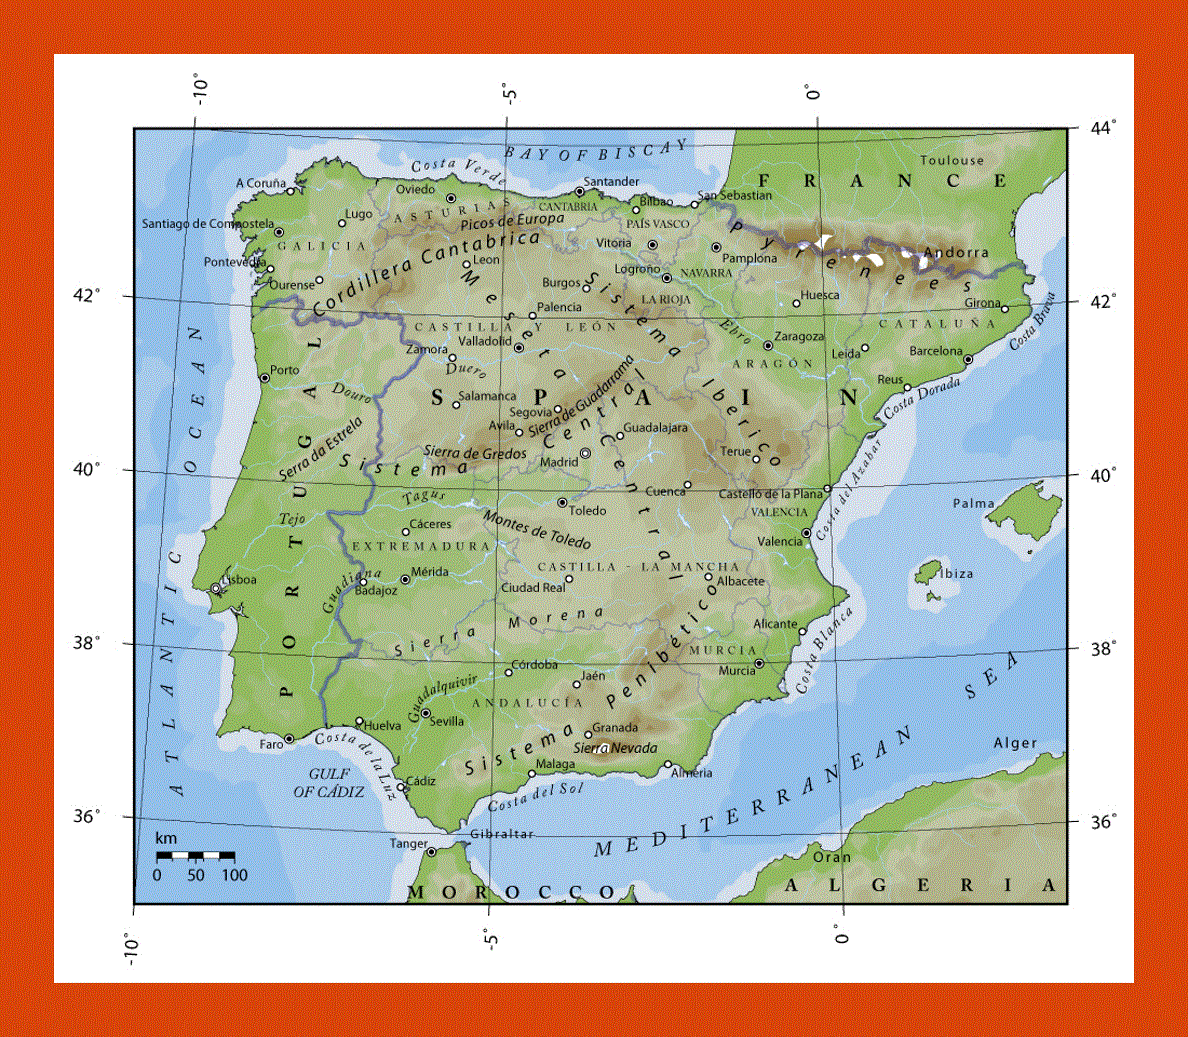 Elevation map of Portugal and Spain